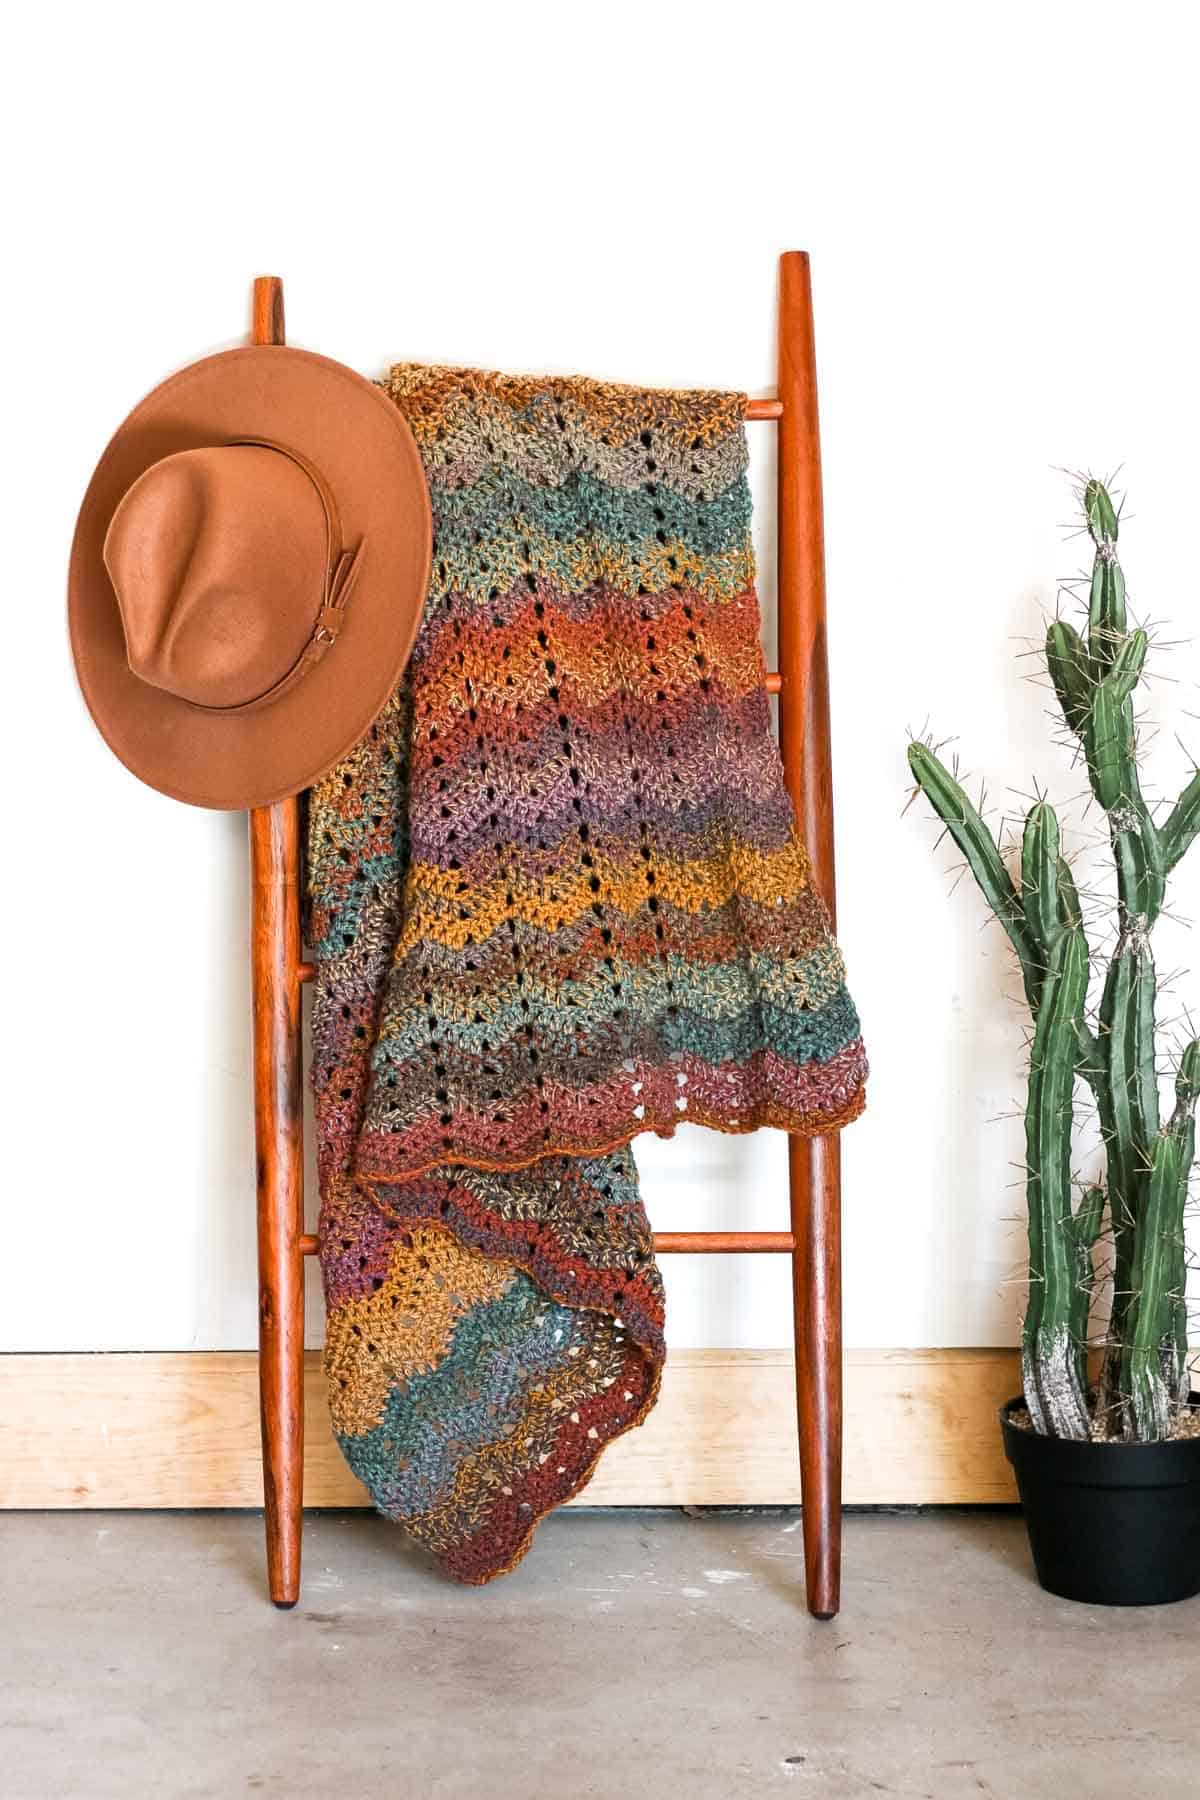 Hanging on a ladder is a crochet ripple blanket and a fedora hat.